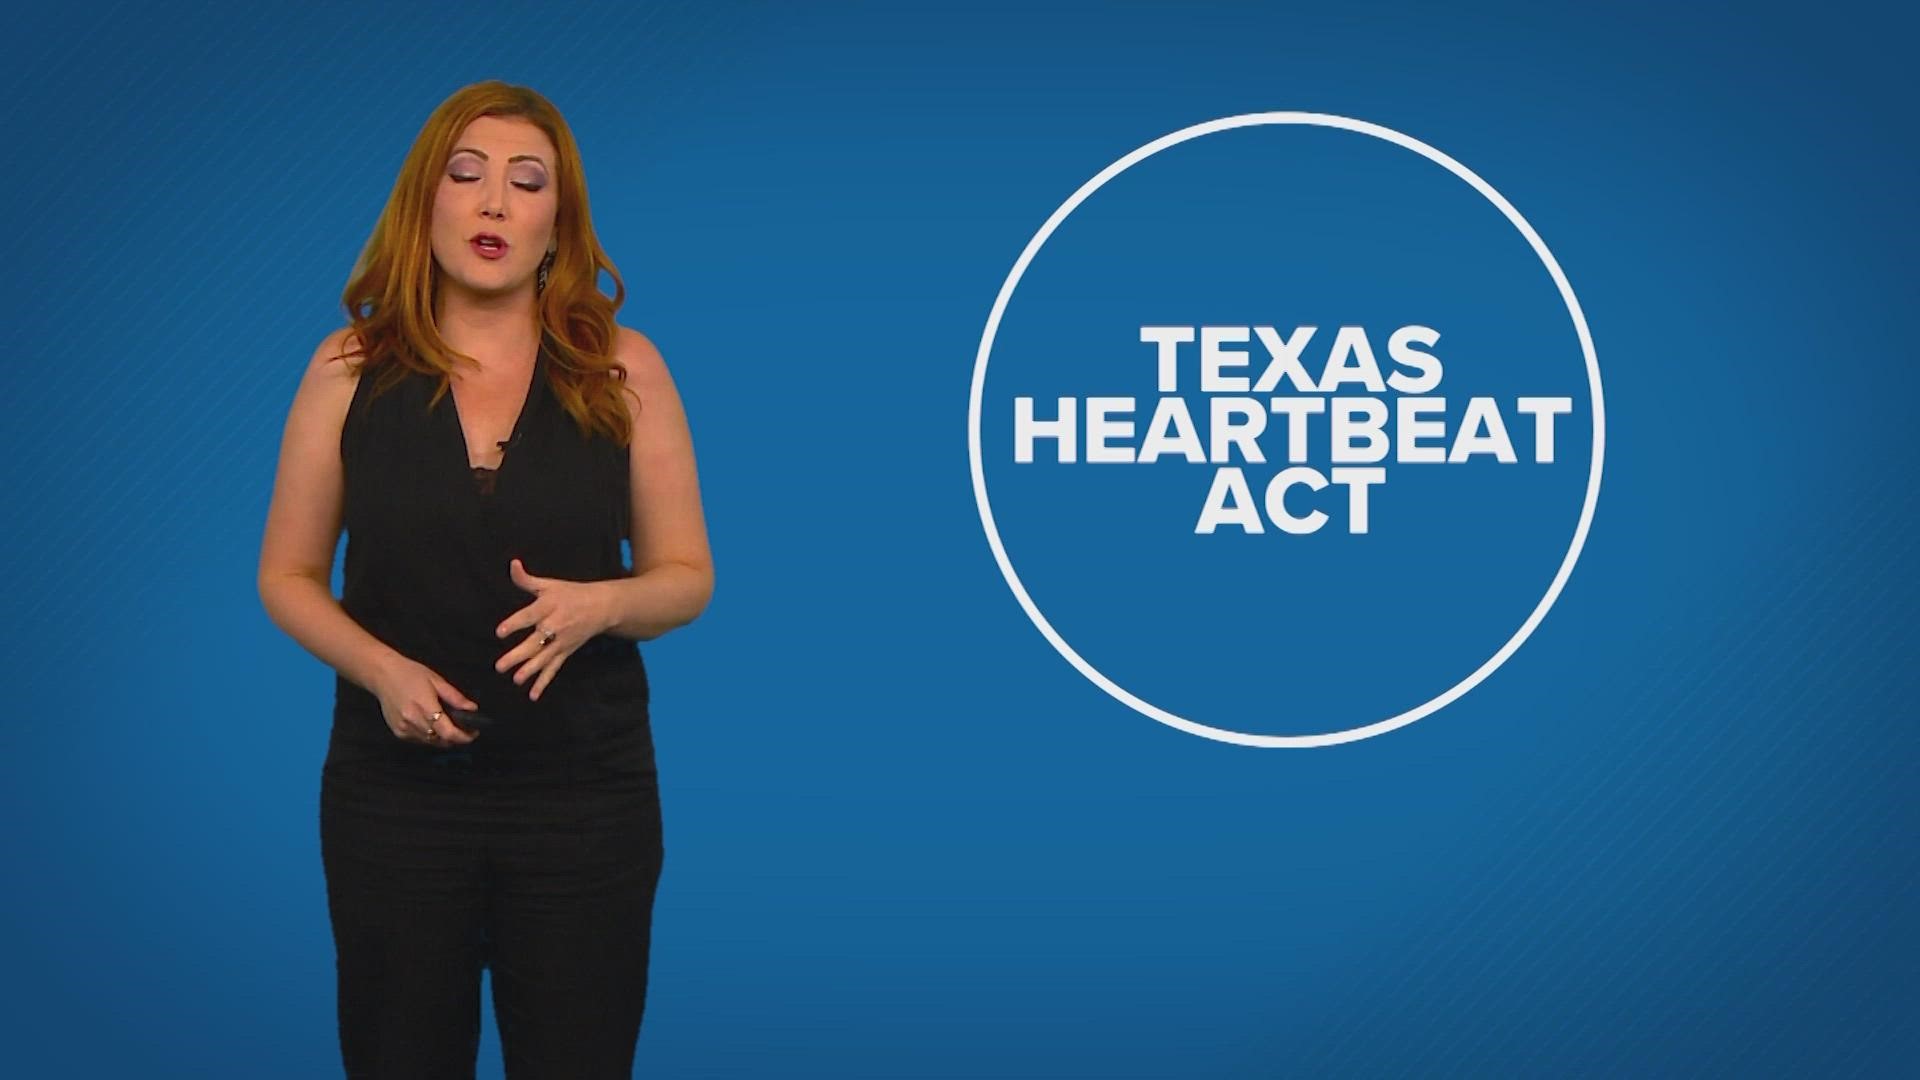 The debate over the Texas Heartbeat Act stirred up a lot of questions, including this one.